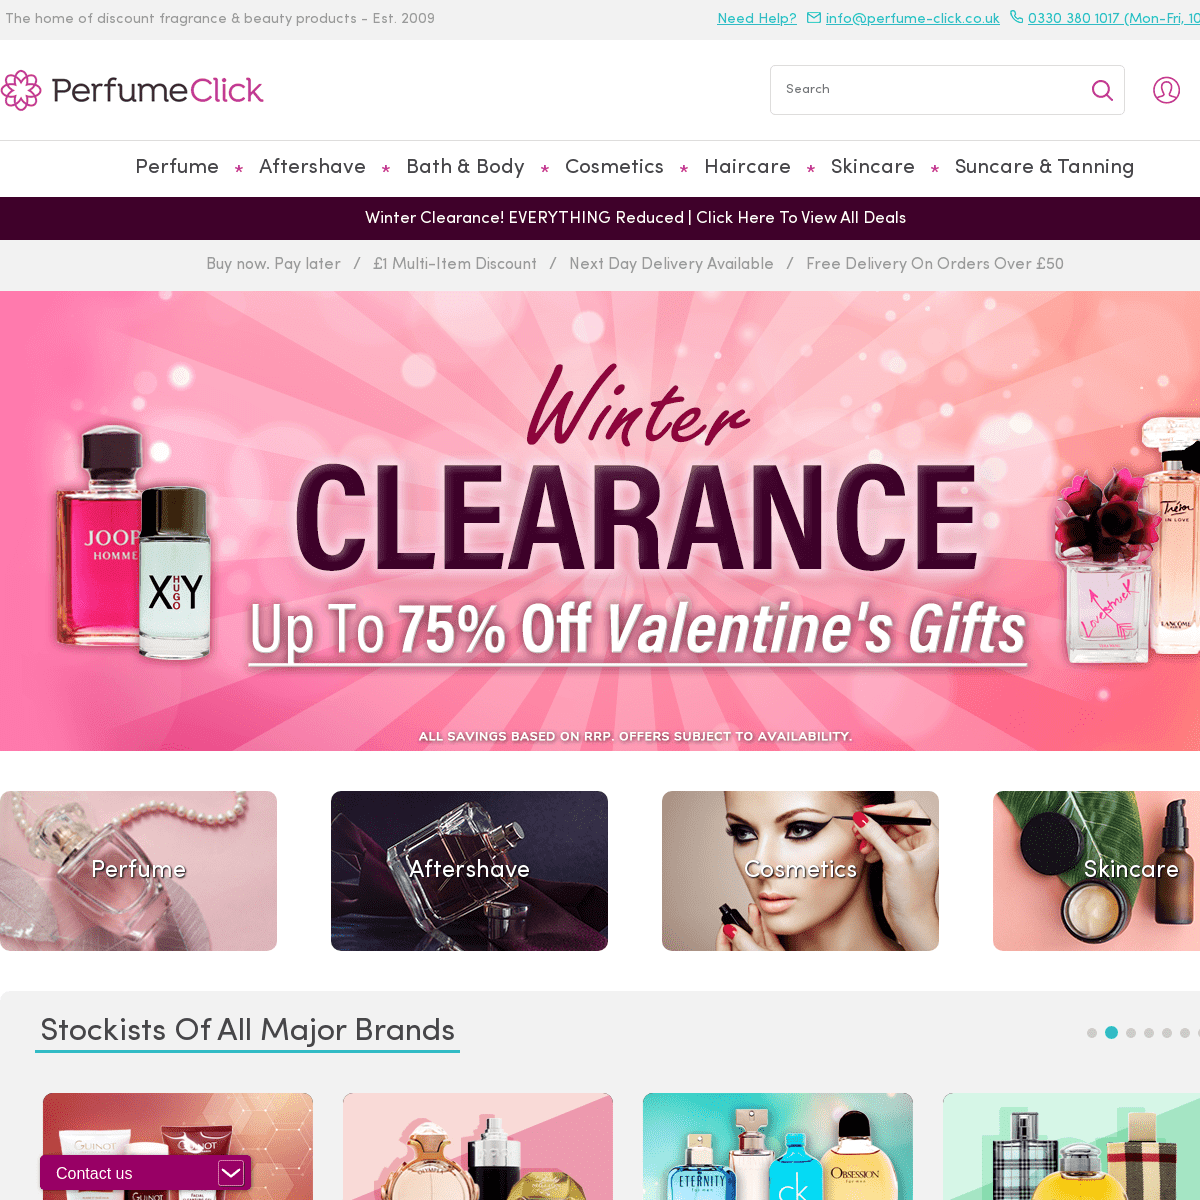 A complete backup of perfume-click.co.uk